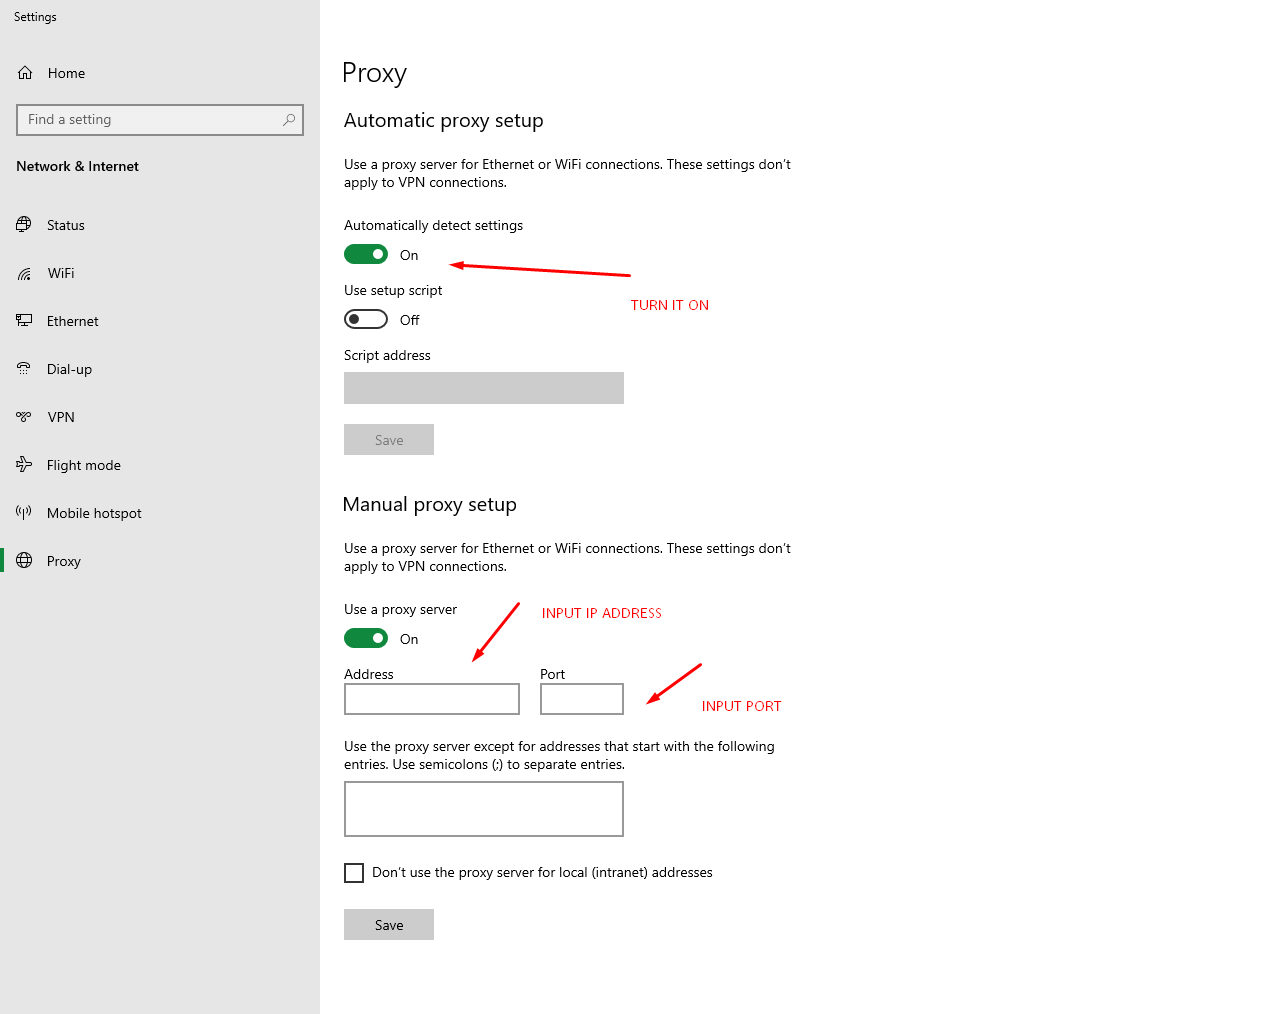 HOW TO SETUP PROXY IN WINDOWS 10